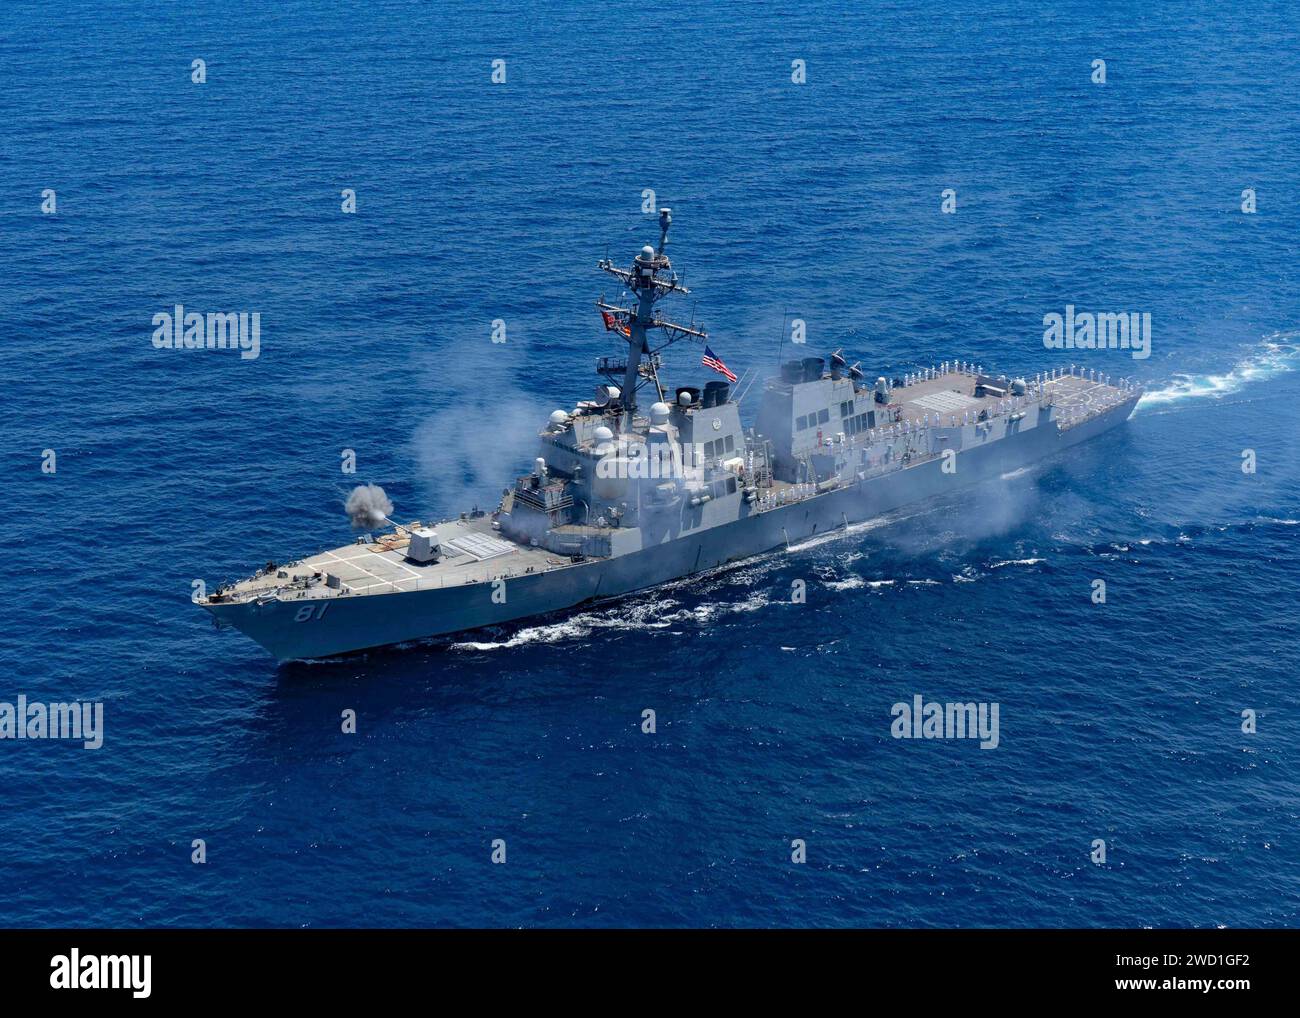 Guided-missile destroyer USS Winston S. Churchill fires its Mark 45 5-inch gun. Stock Photo